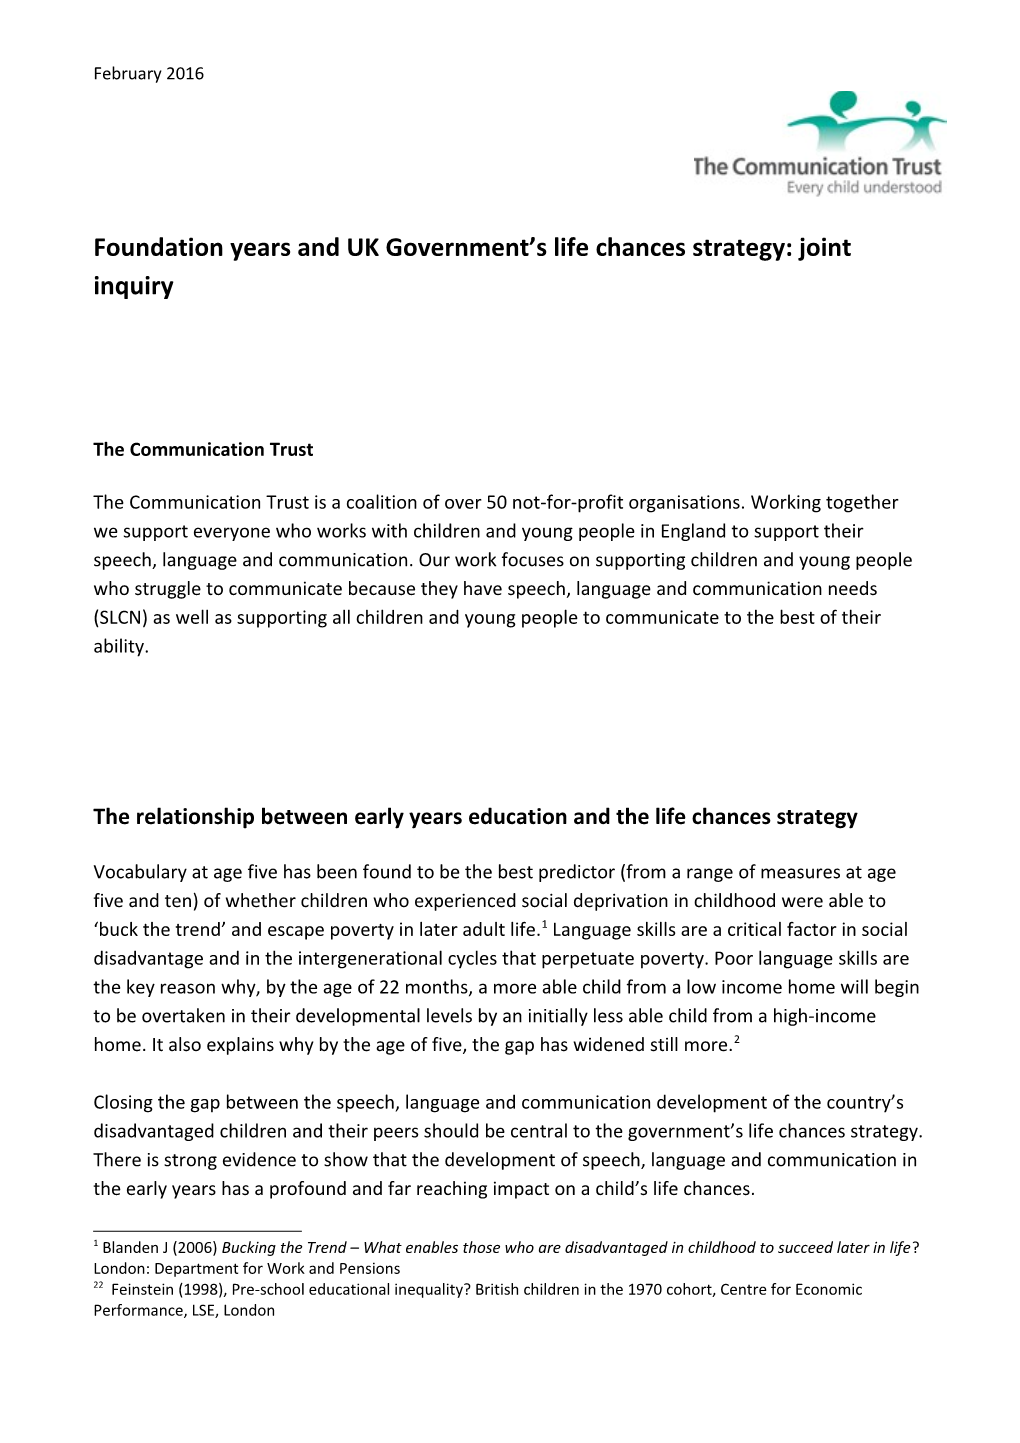 Foundation Years and UK Government S Life Chances Strategy: Joint Inquiry